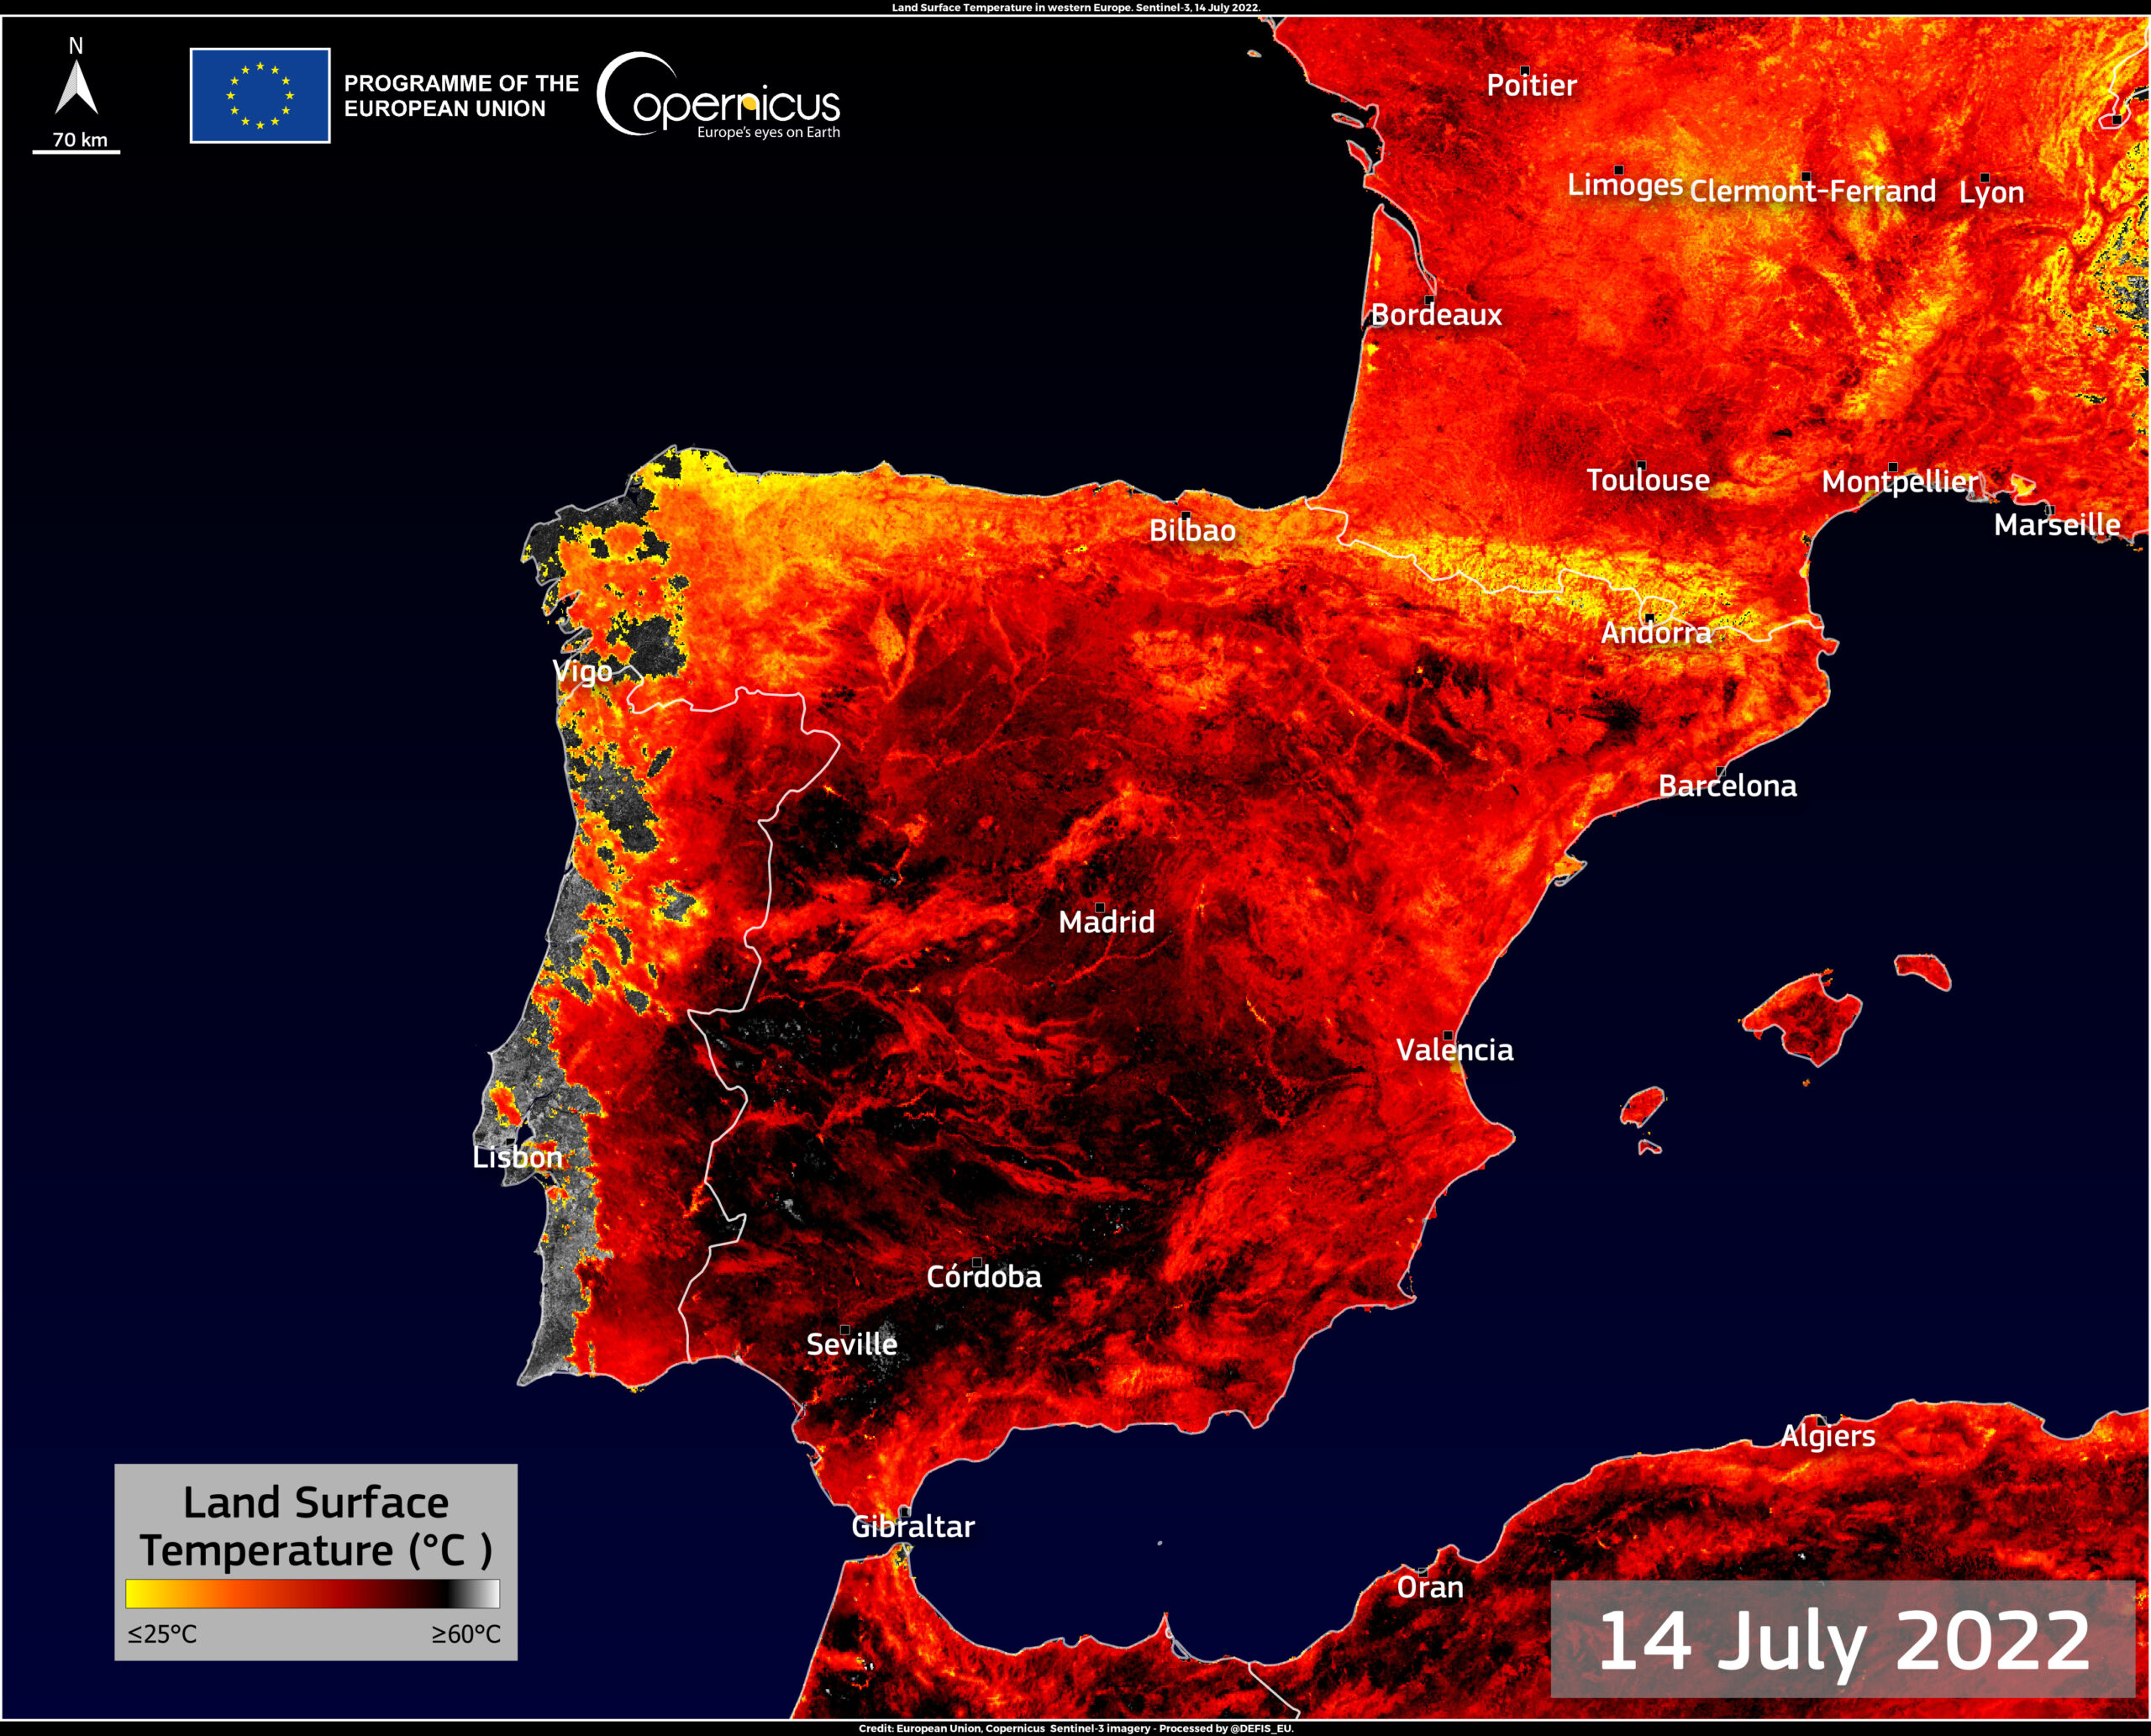 Land Surface Temperature of Spain and Frence